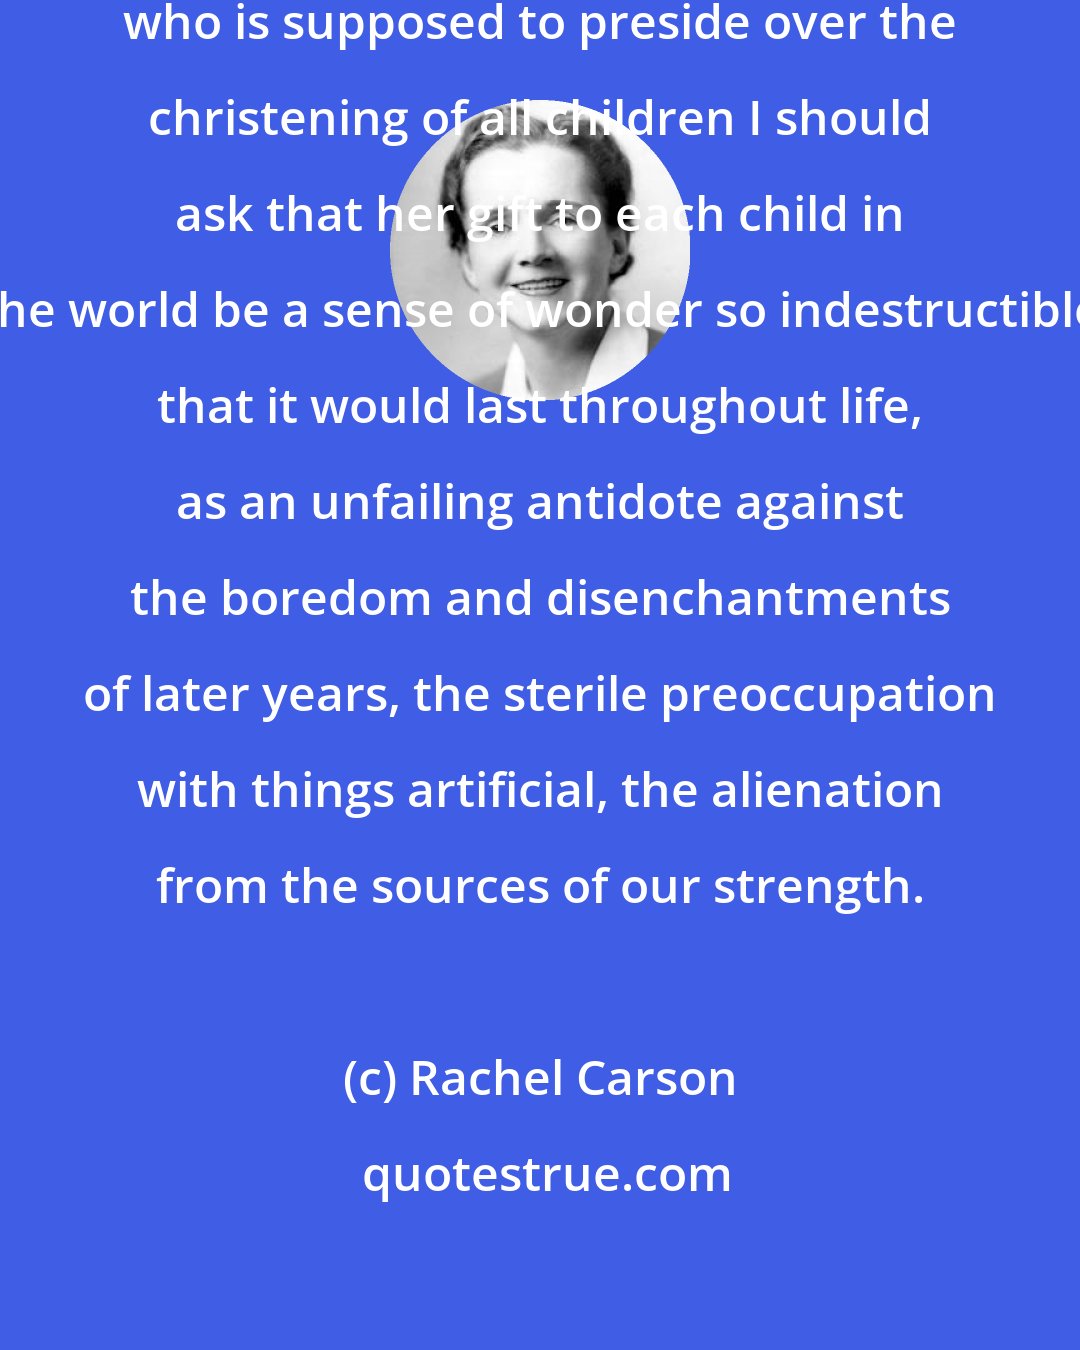 Rachel Carson: If I had influence with the good fairy who is supposed to preside over the christening of all children I should ask that her gift to each child in the world be a sense of wonder so indestructible that it would last throughout life, as an unfailing antidote against the boredom and disenchantments of later years, the sterile preoccupation with things artificial, the alienation from the sources of our strength.